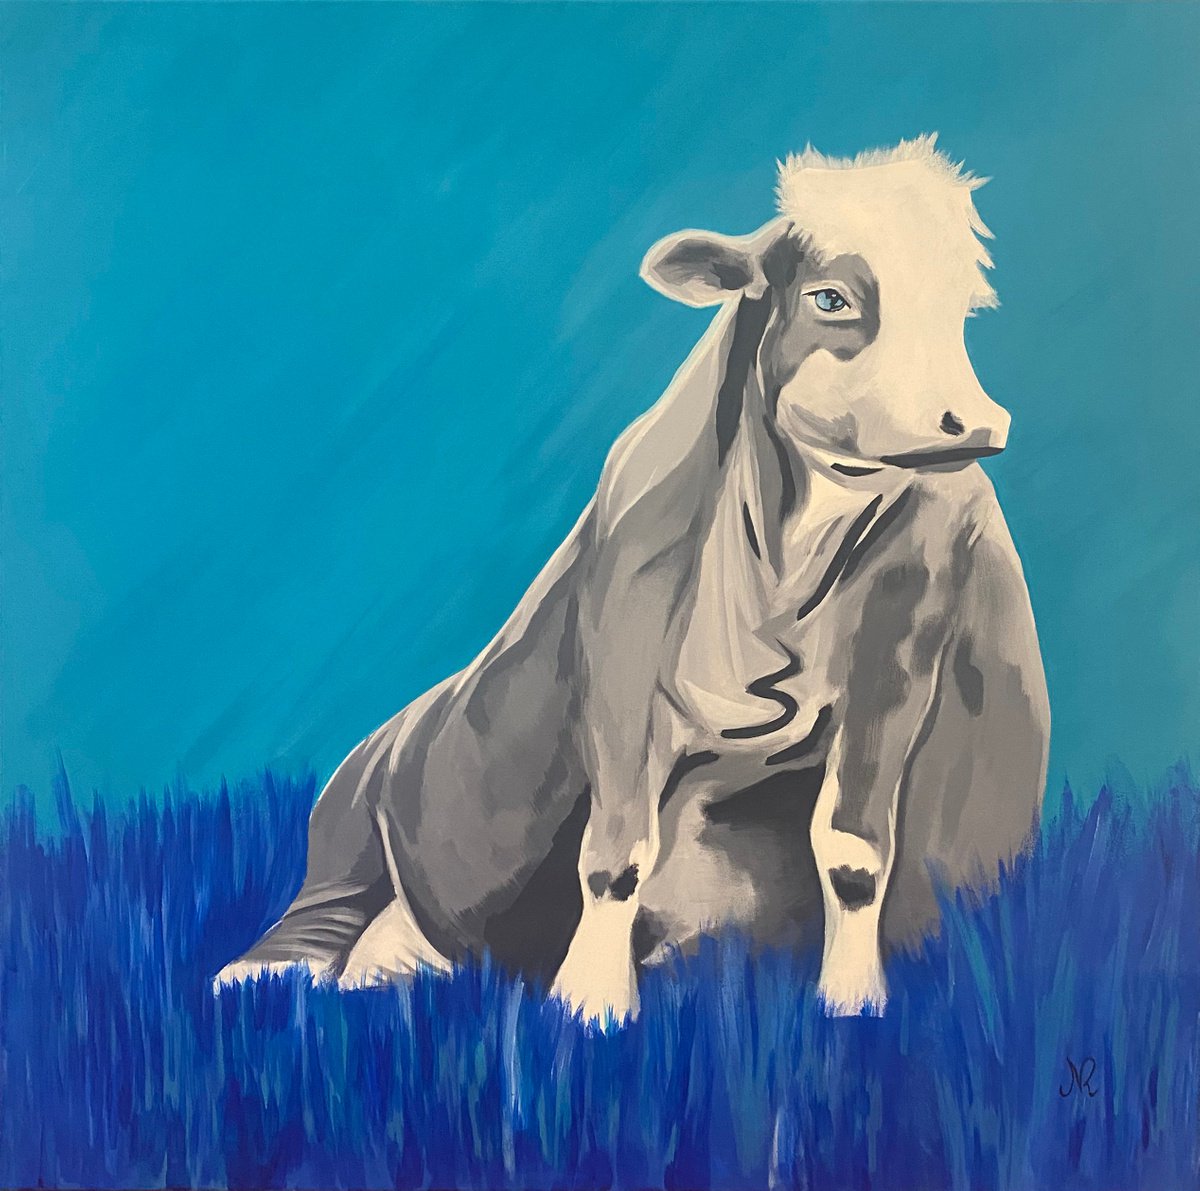 Mooing at nothing, thinking about everything by Nadia Rivera